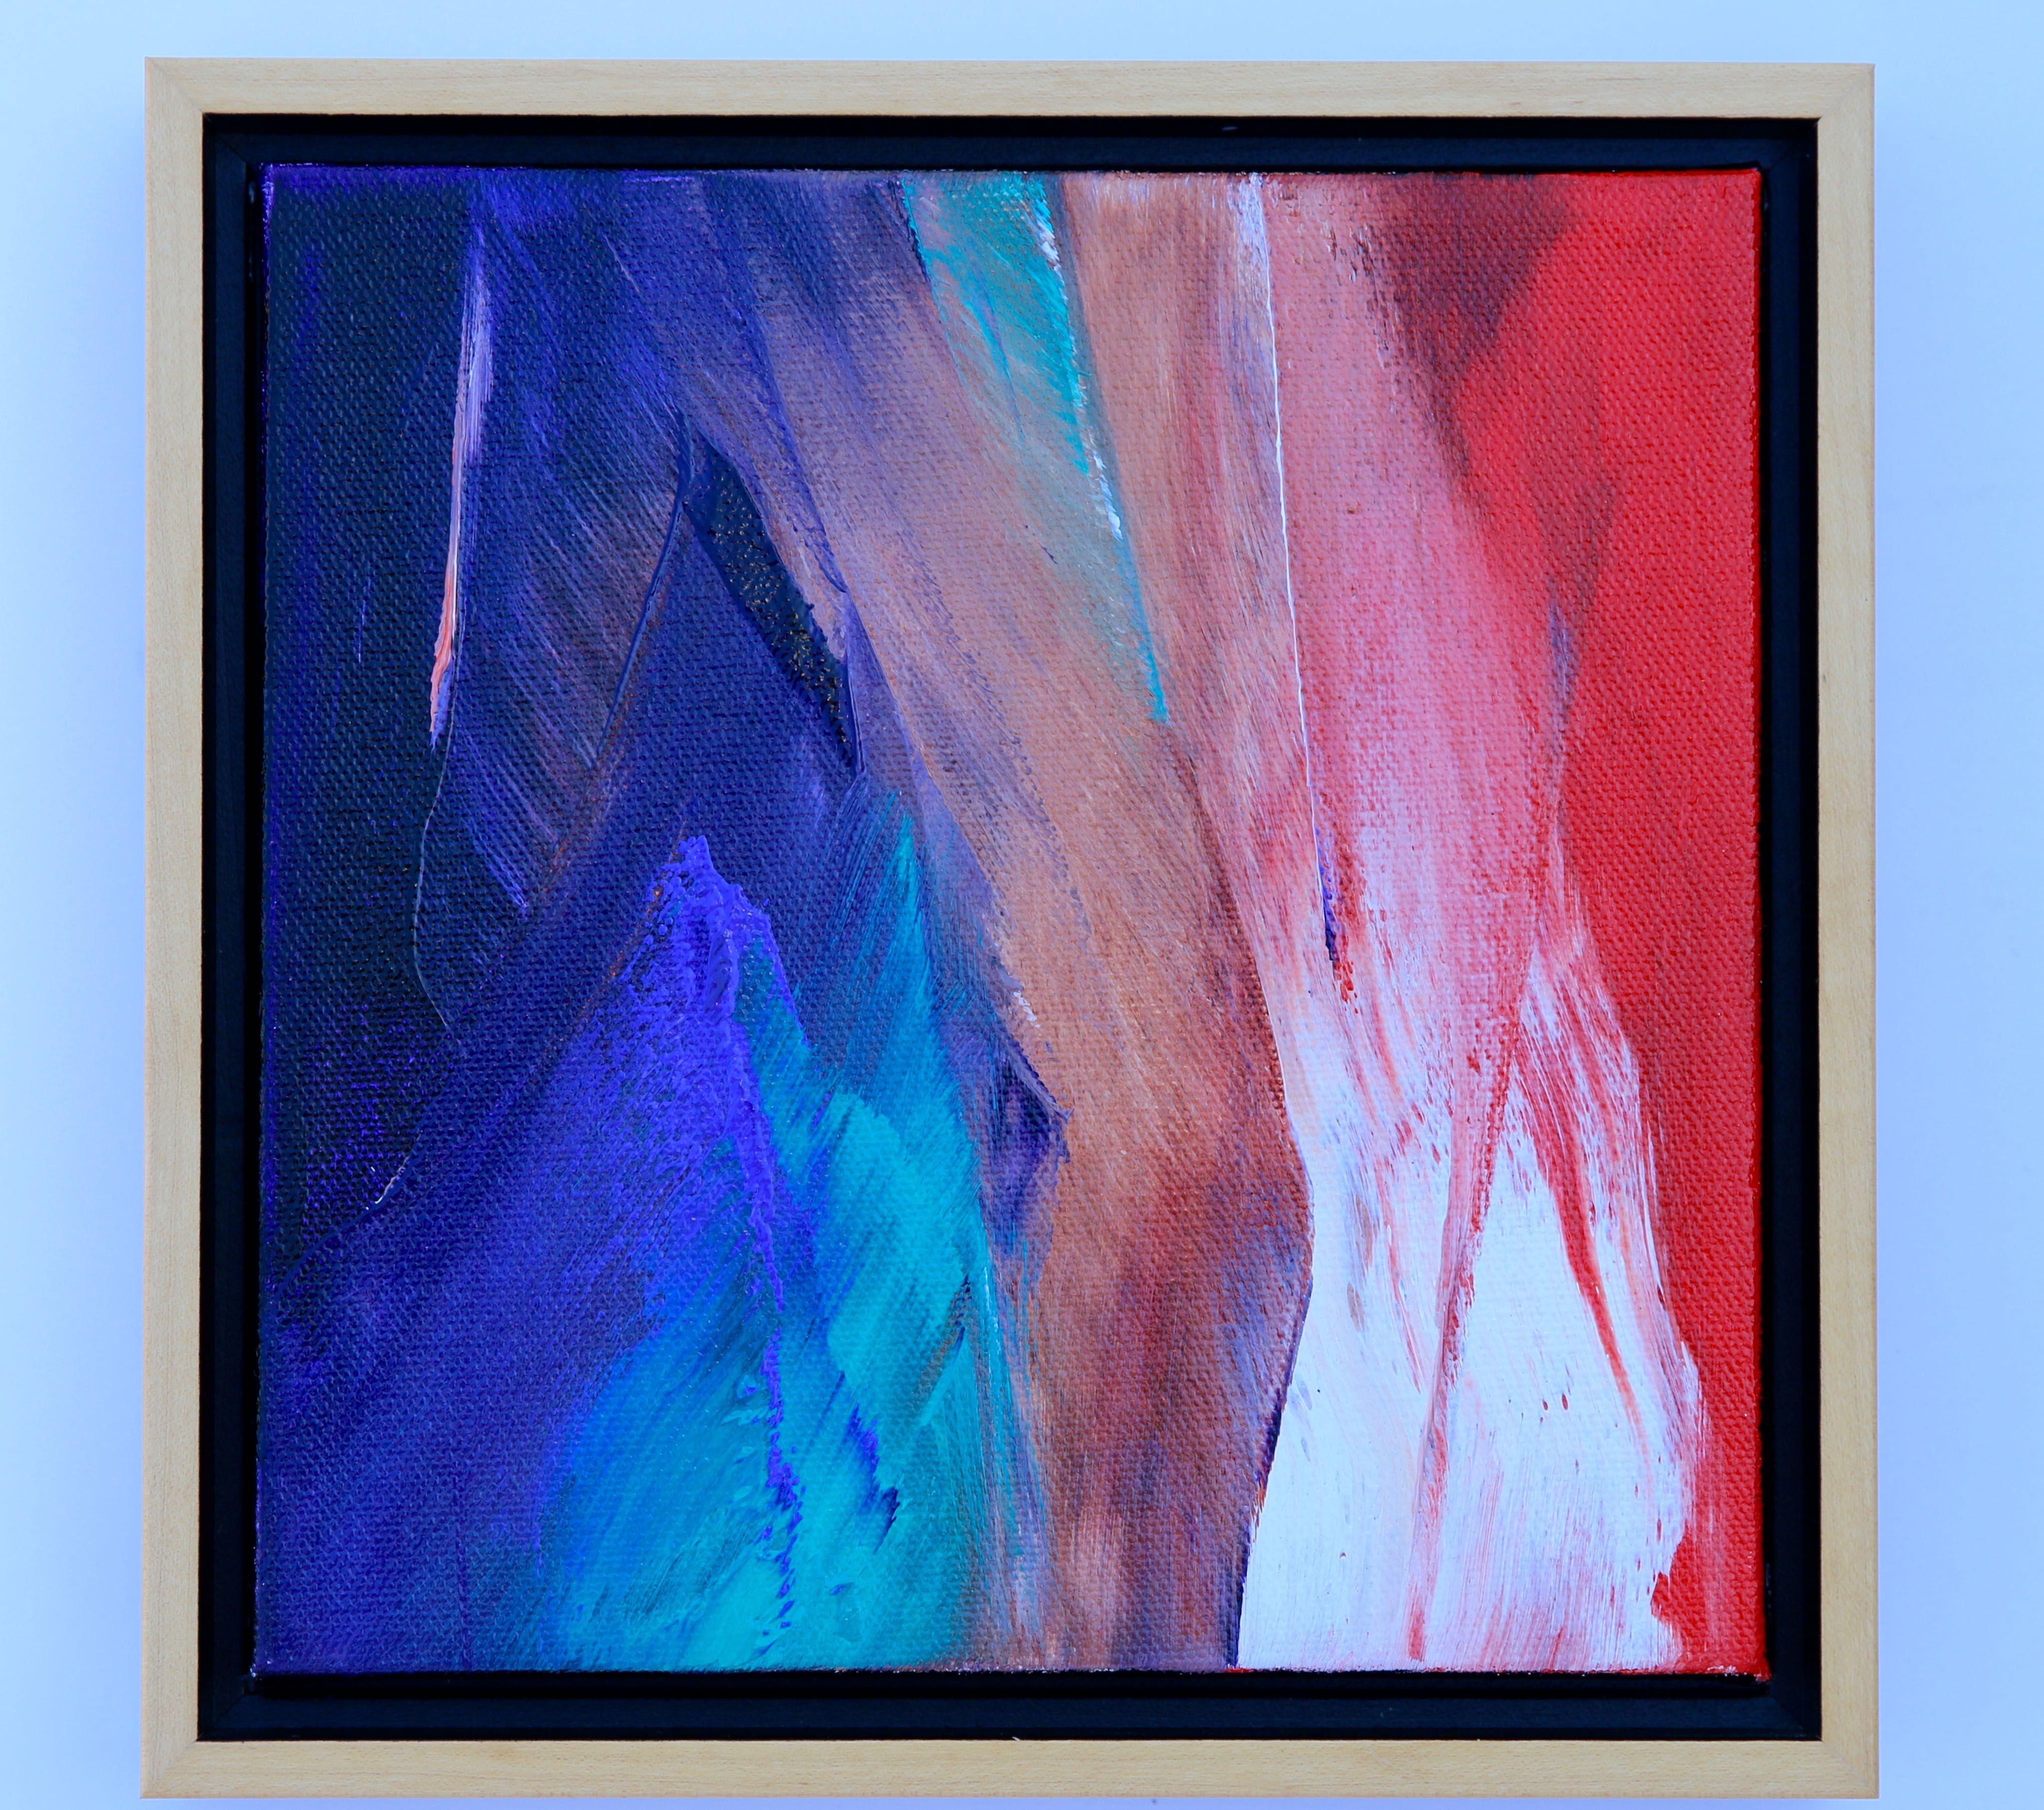 Earth tones combine with jewel tones in a visual love song to the Earth. Painted on gallery-wrapped canvas with painted sides. Framed in a solid natural maple floater frame, ready to hang. :: Painting :: Abstract :: This piece comes with an official